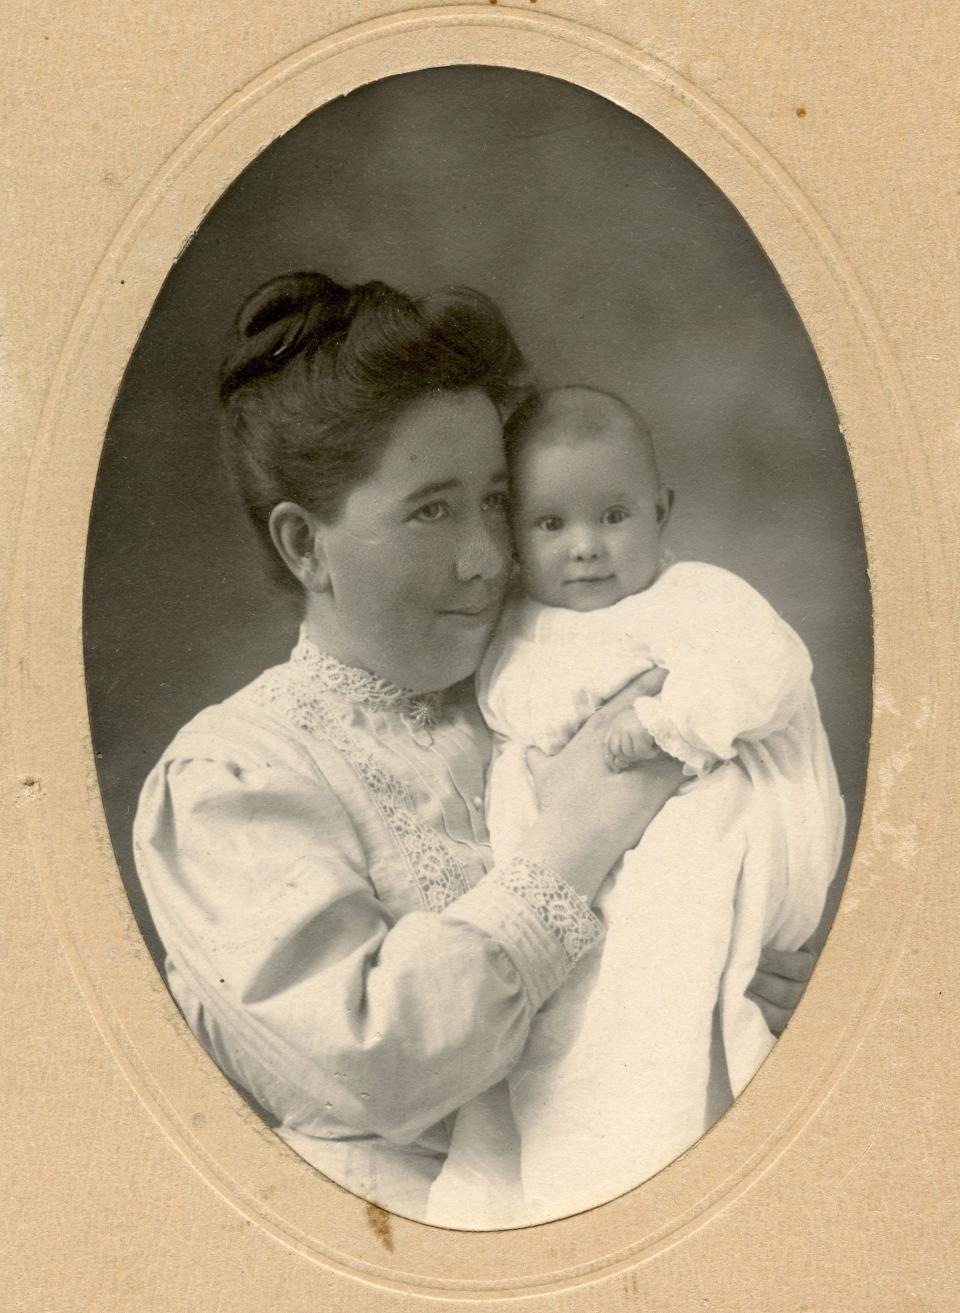 Mary Ann Badger was three months and three days old when she and her mom, Mary G. Badger, were photographed in 1910.